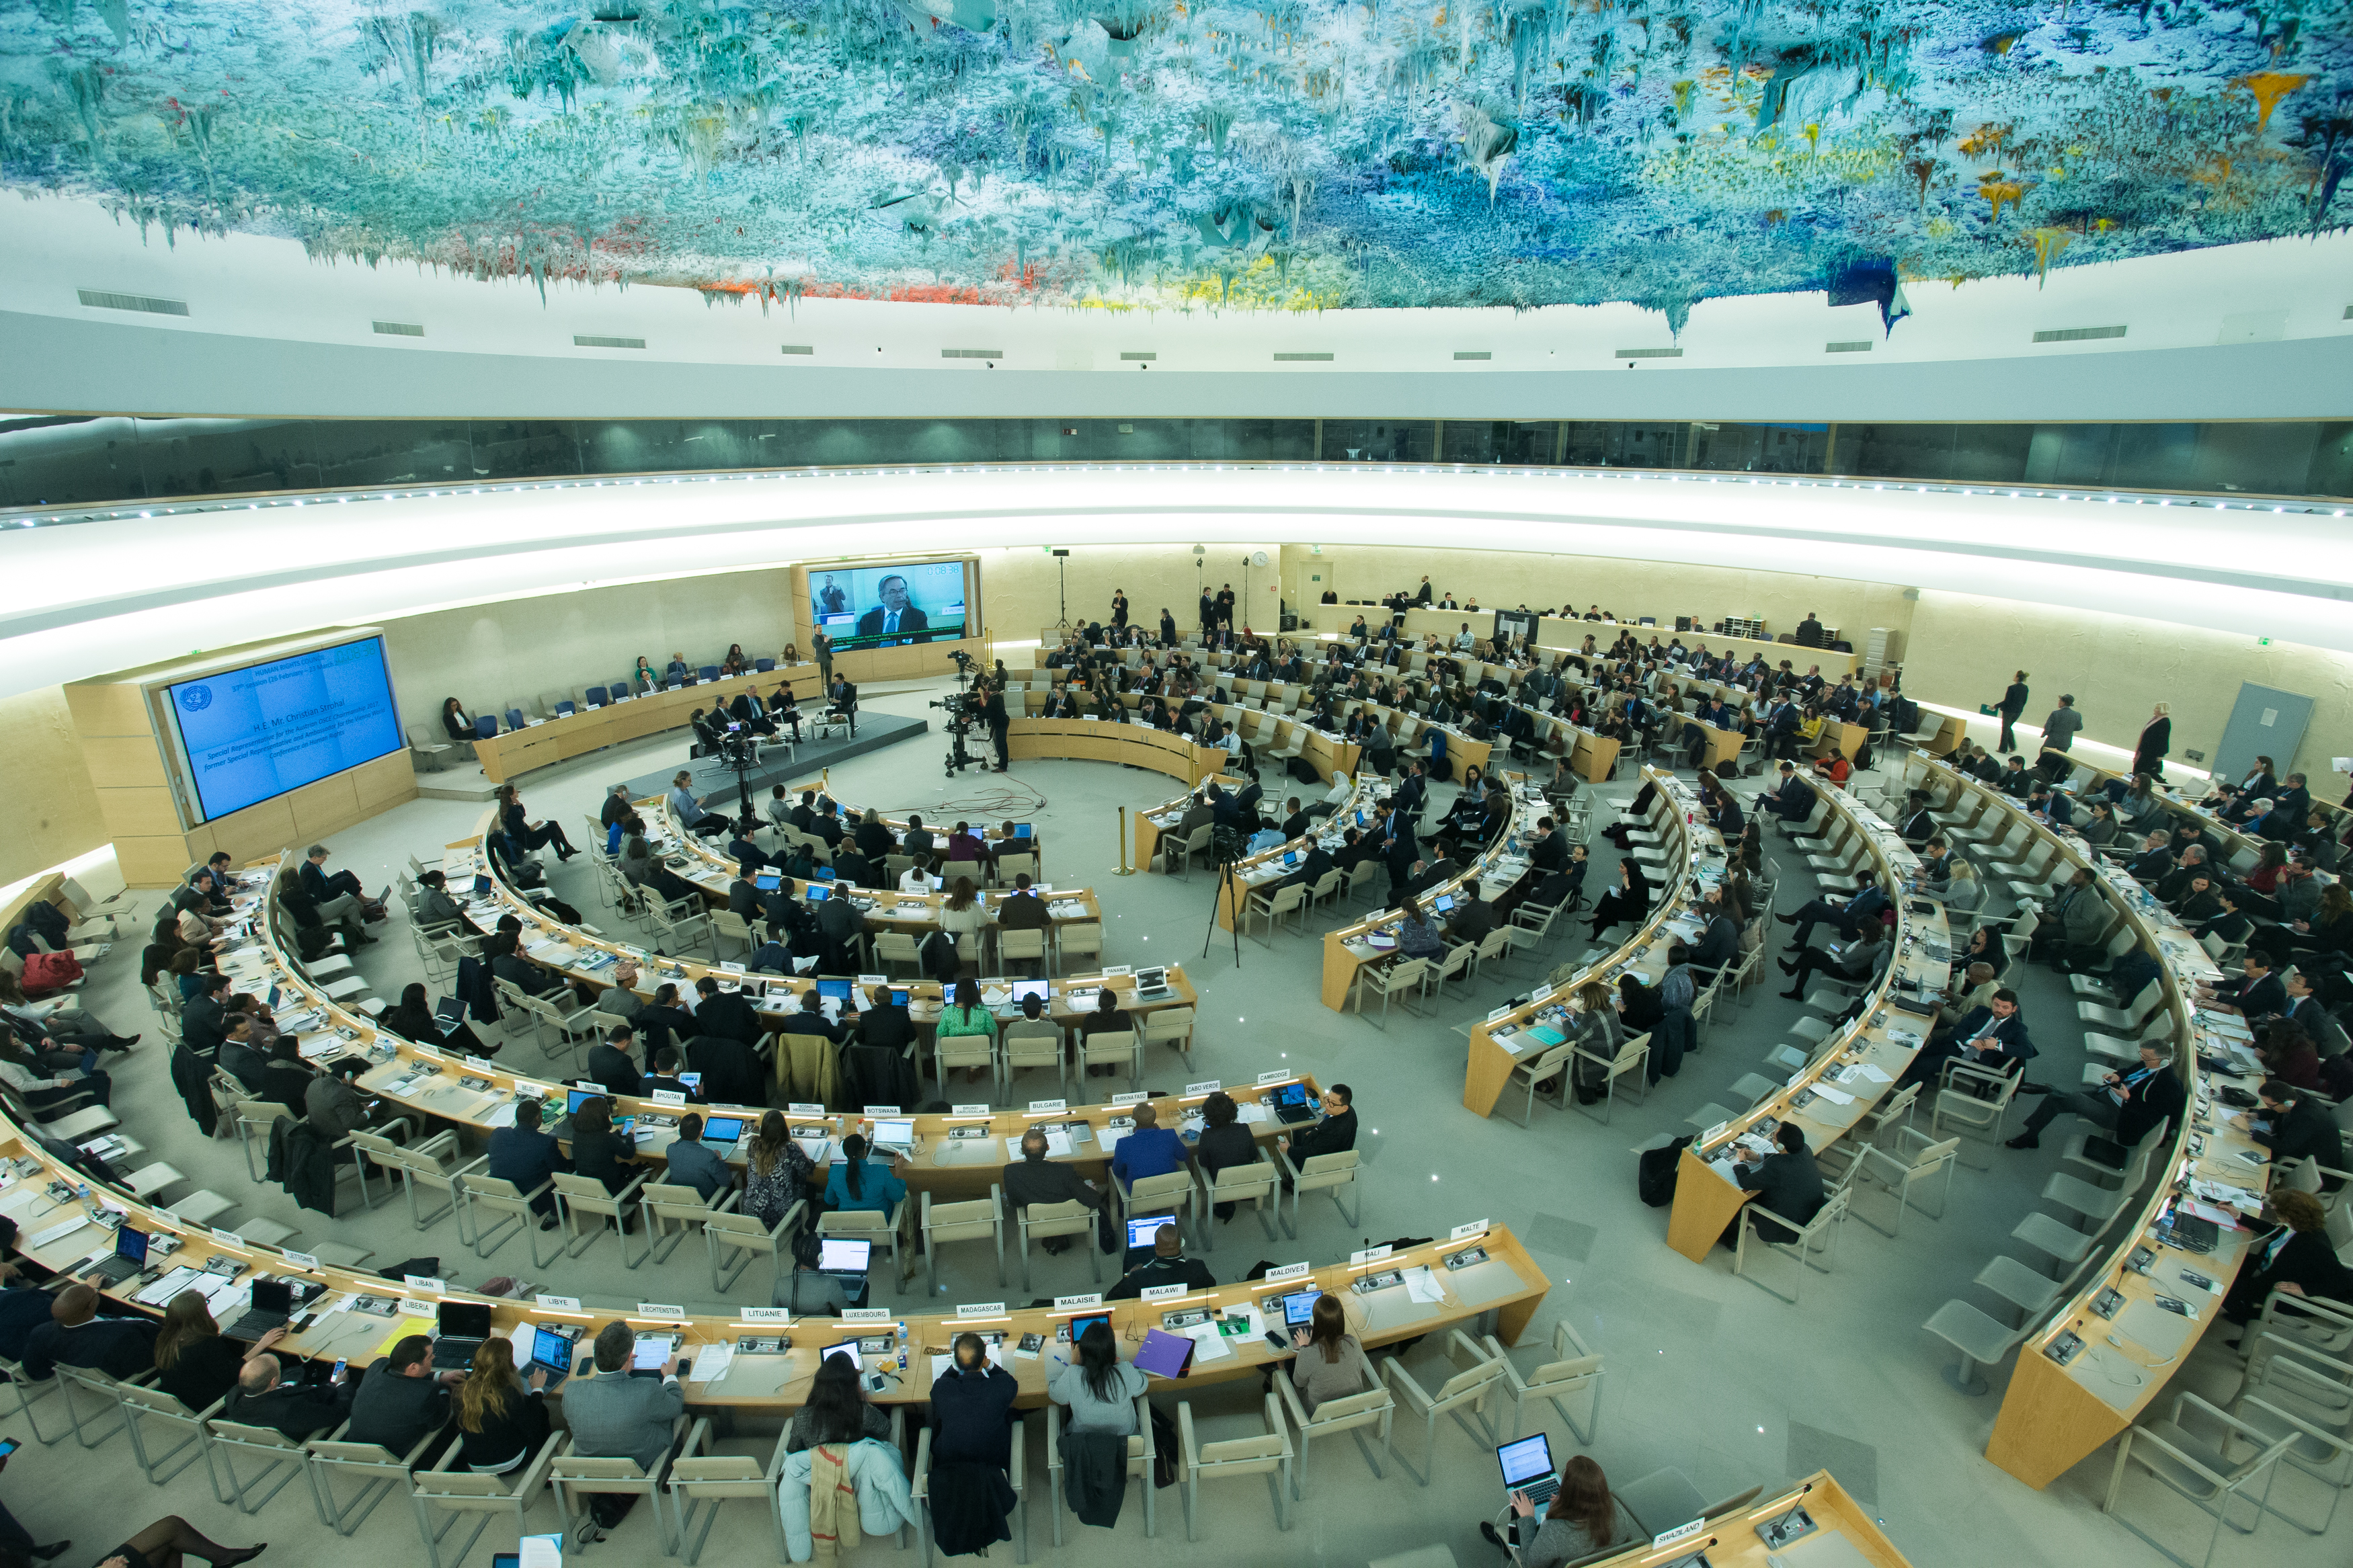 37th Session of the Human Rights Council, High-Level Panel: 70th Anniversary of the UDHR and 25th of VDPA, Palais des Nations, 28 February 2018, Geneva, Switzerland. OCHCHR/Pierre Albouy